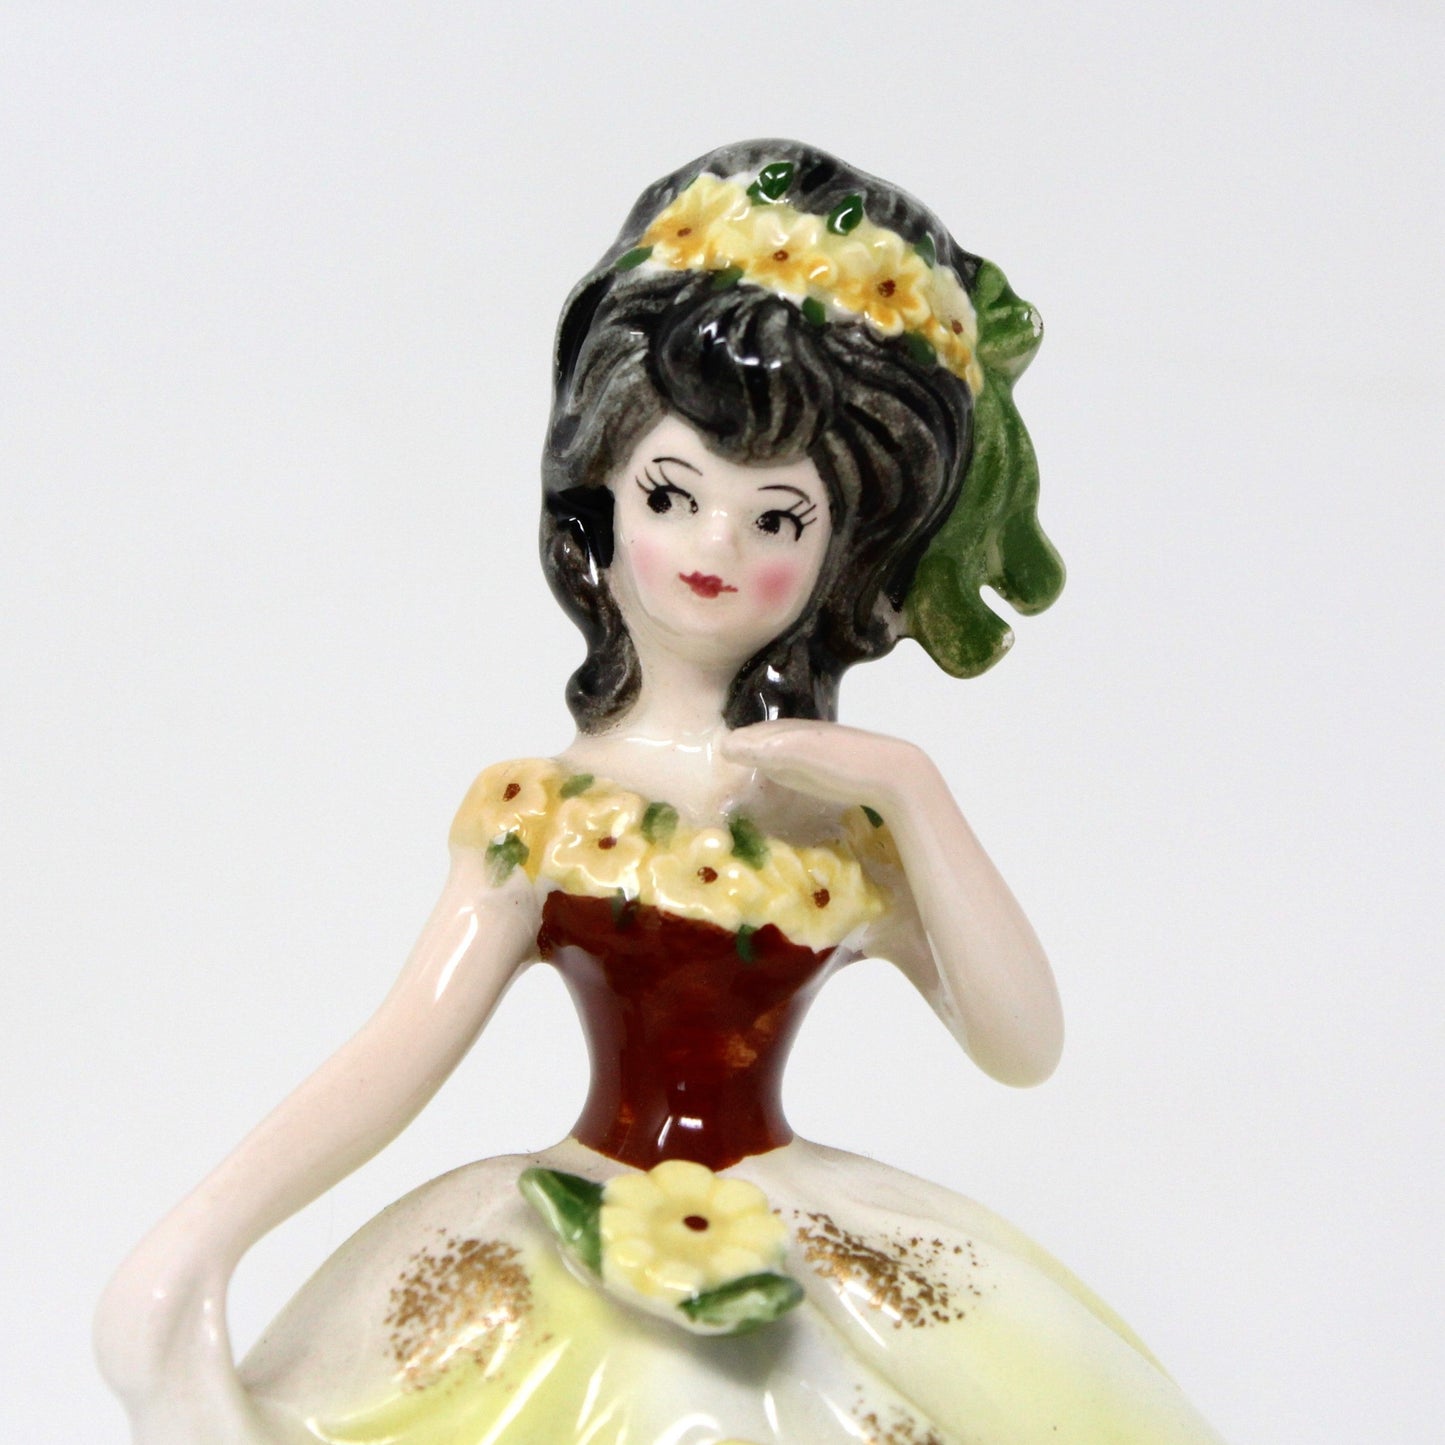 Figurine, Lefton, Designed By Marika, Mathilde, Girl in Yellow Dress with Flowers, Vintage